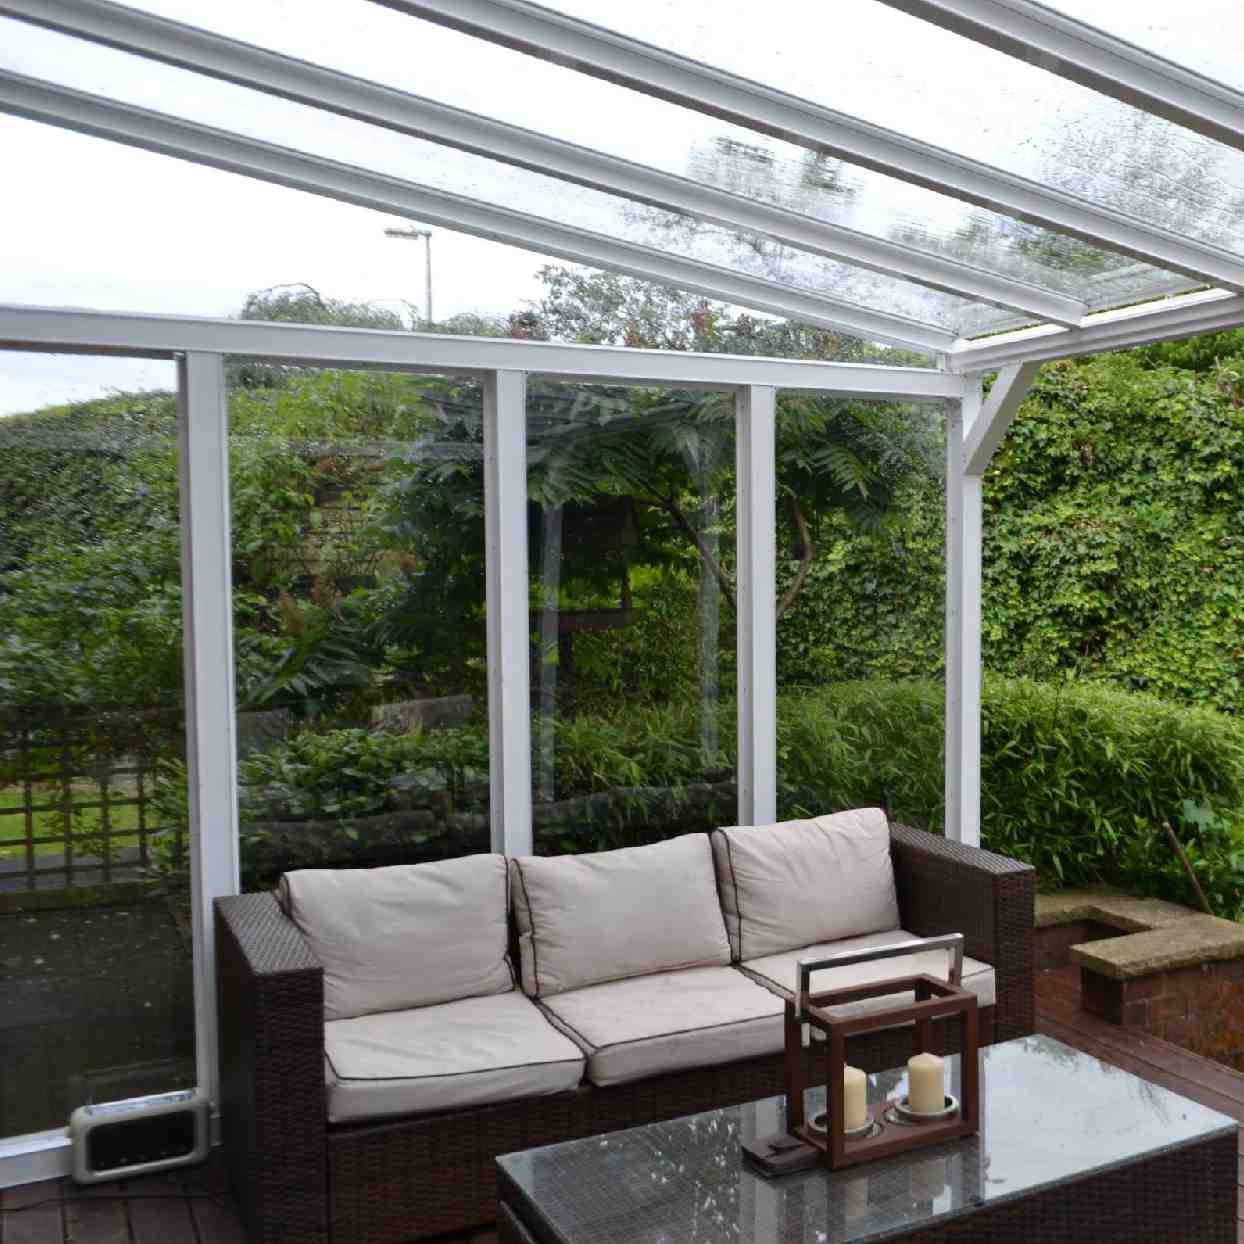 Buy Omega Verandah White with 16mm Polycarbonate Glazing - 3.5m (W) x 4.5m (P), (3) Supporting Posts online today